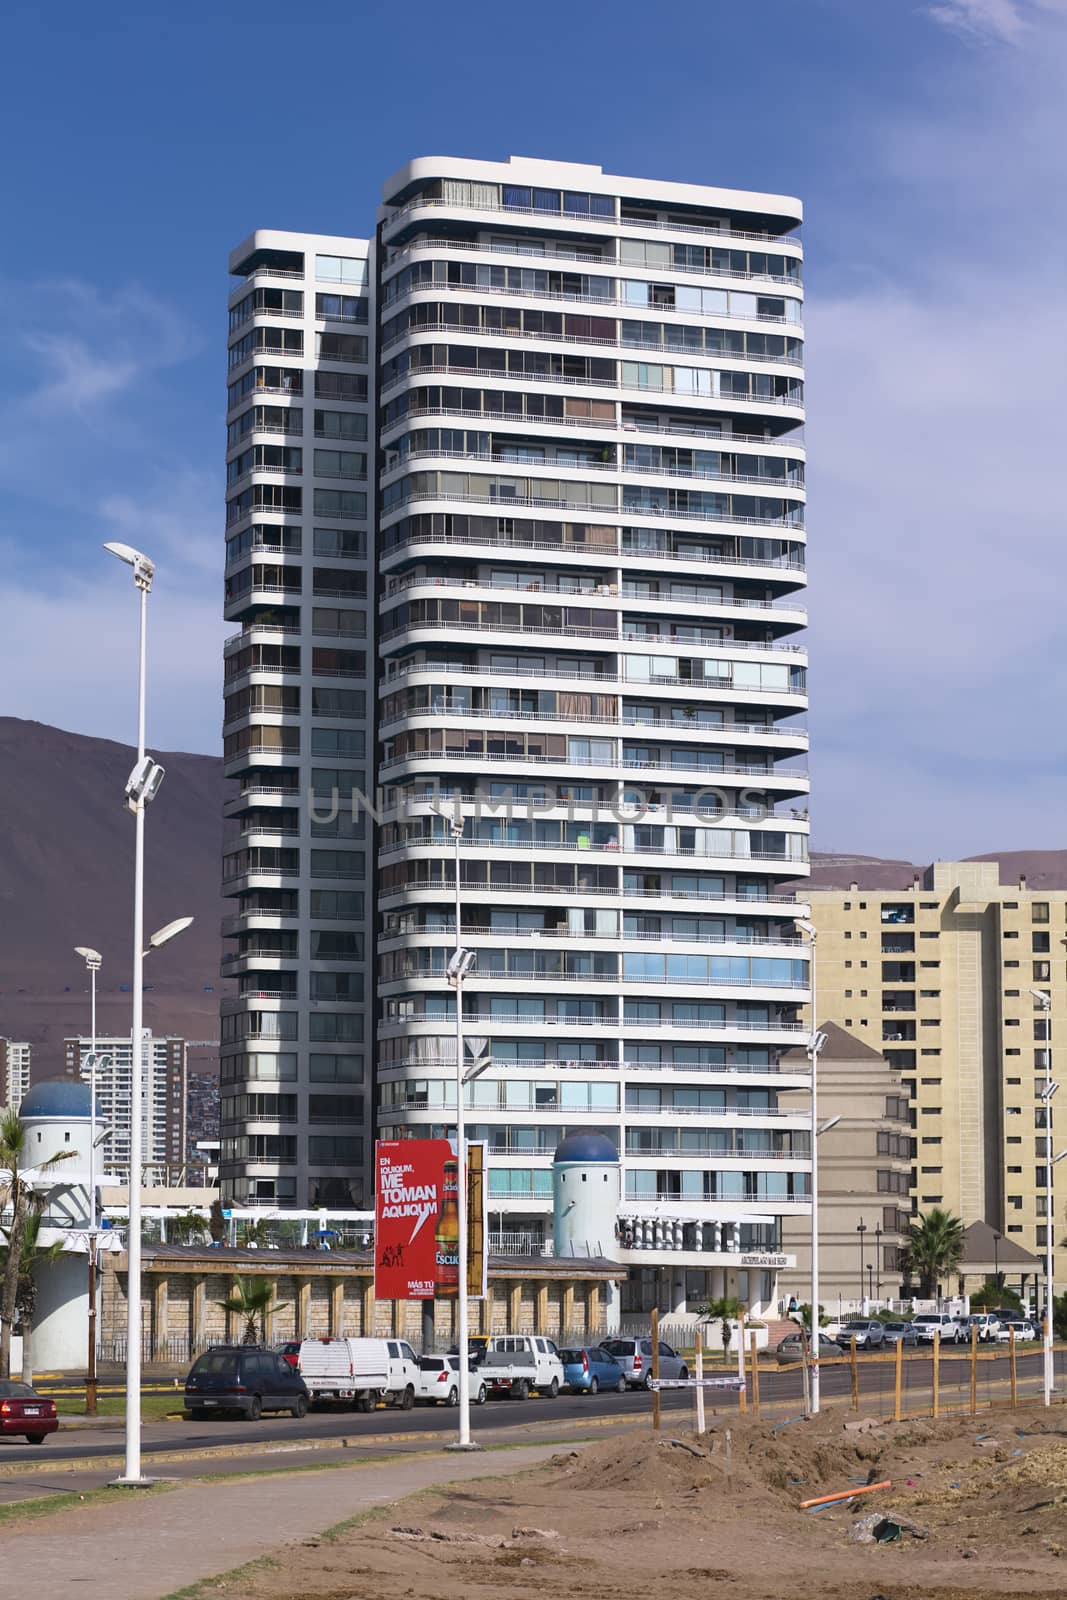 IQUIQUE, CHILE - JANUARY 23, 2015: The entrance area of the modern residential building complex called Archipielago Mar Egeo along the Arturo Prat Chacon avenue on the Pacific coast on January 23, 2015 in Iquique, Chile